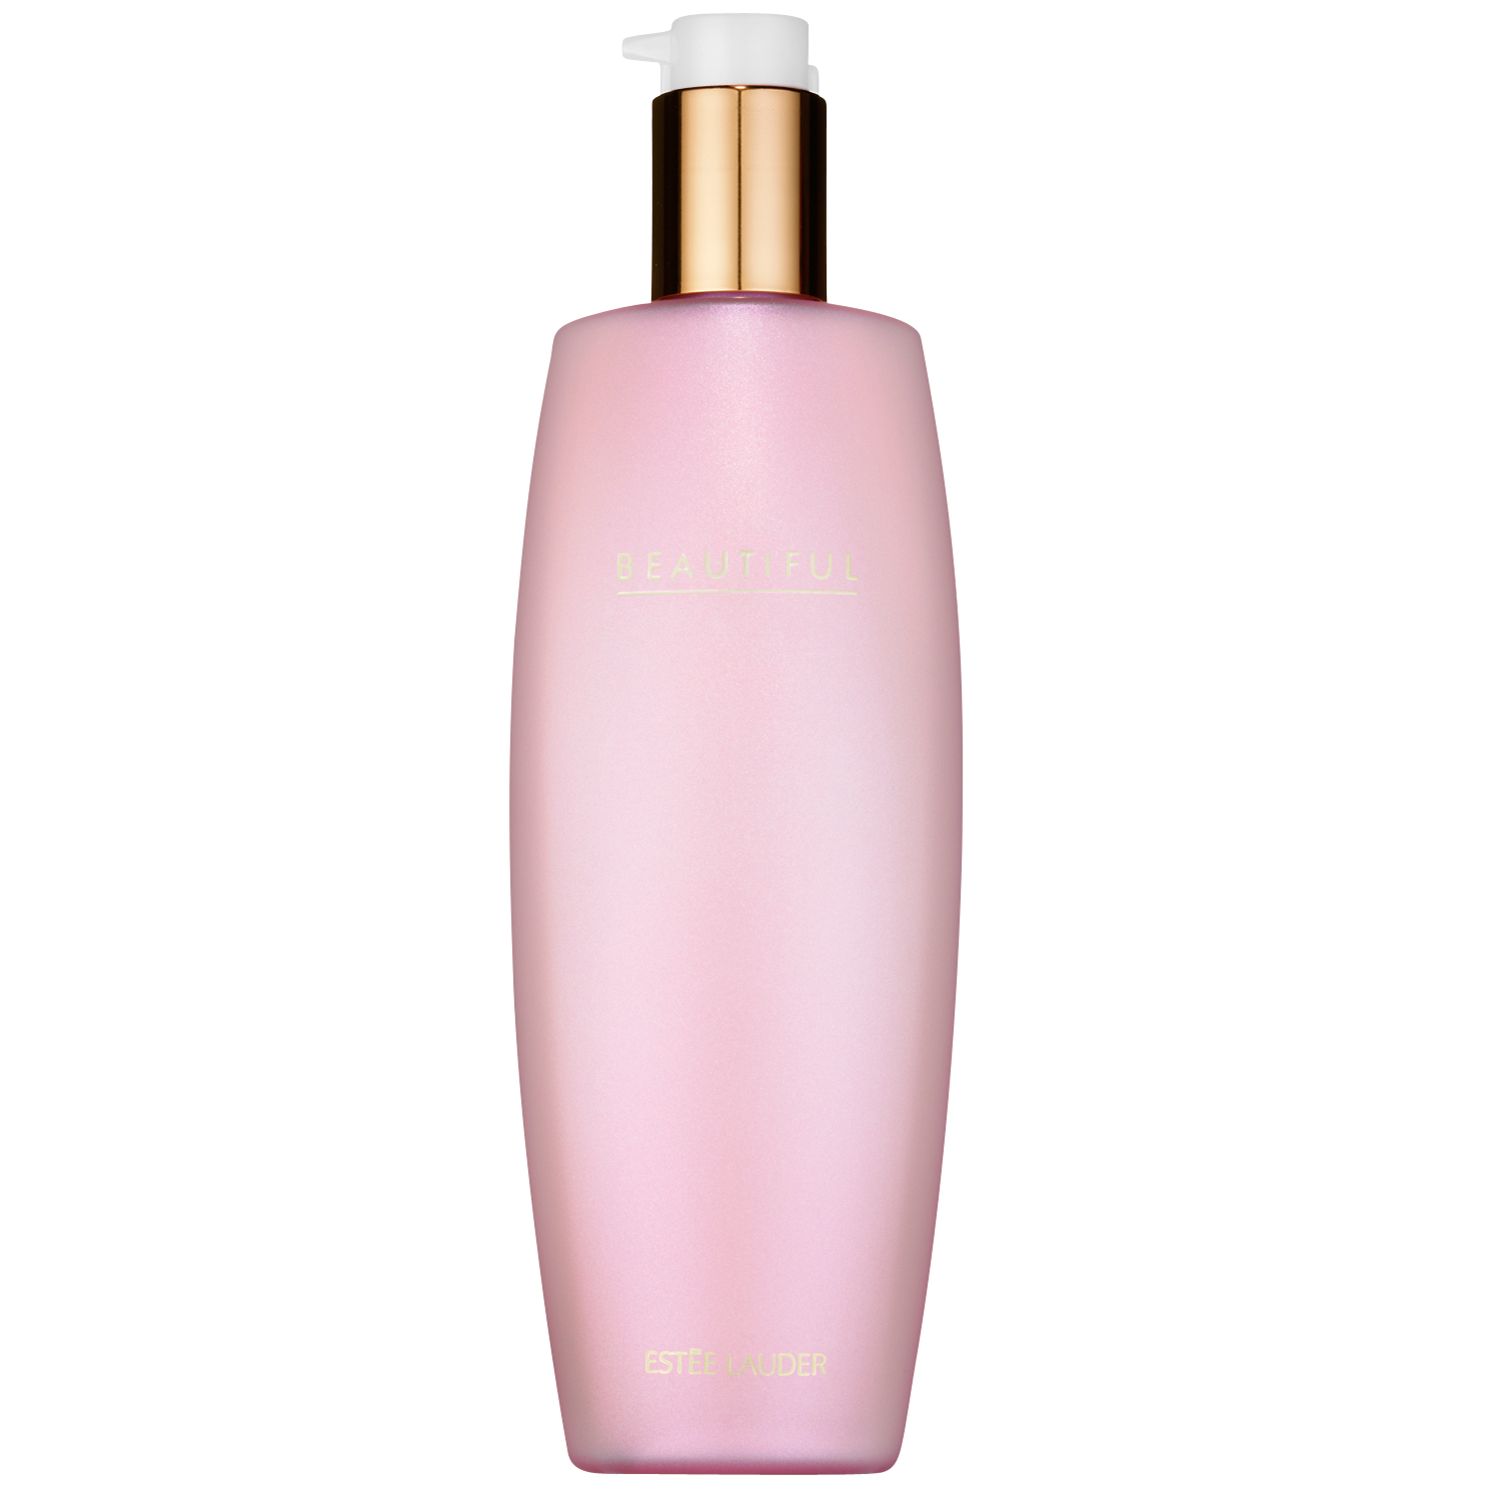 Lauder Beautiful Body Lotion, 250ml at Lewis & Partners